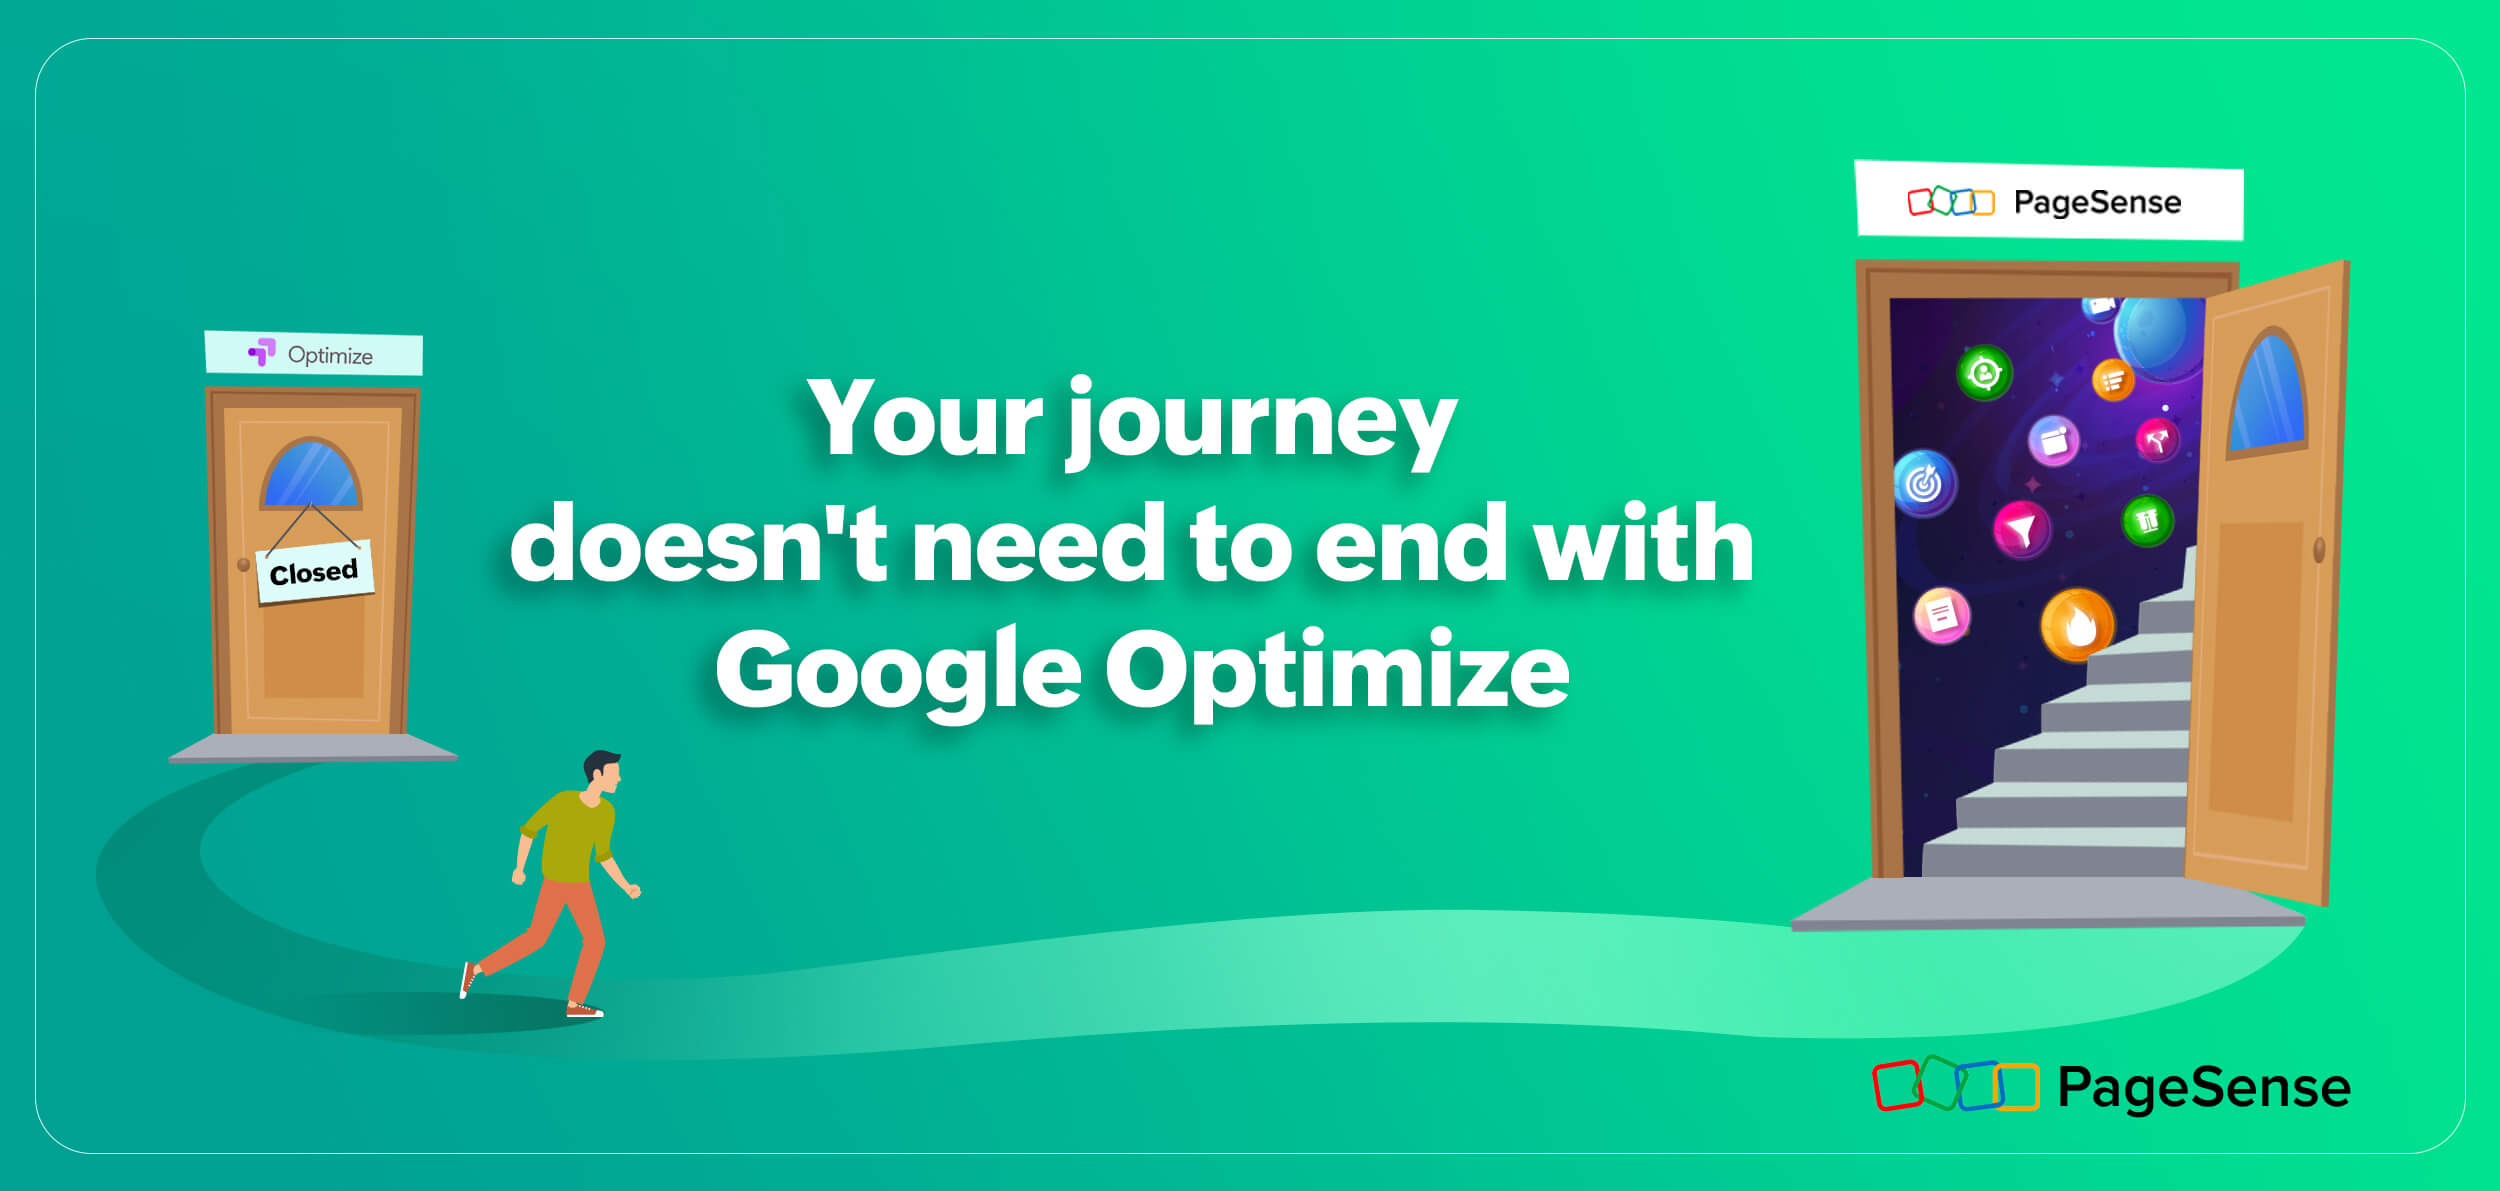 Introducing Zoho PageSense's free plan for Google Optimize users